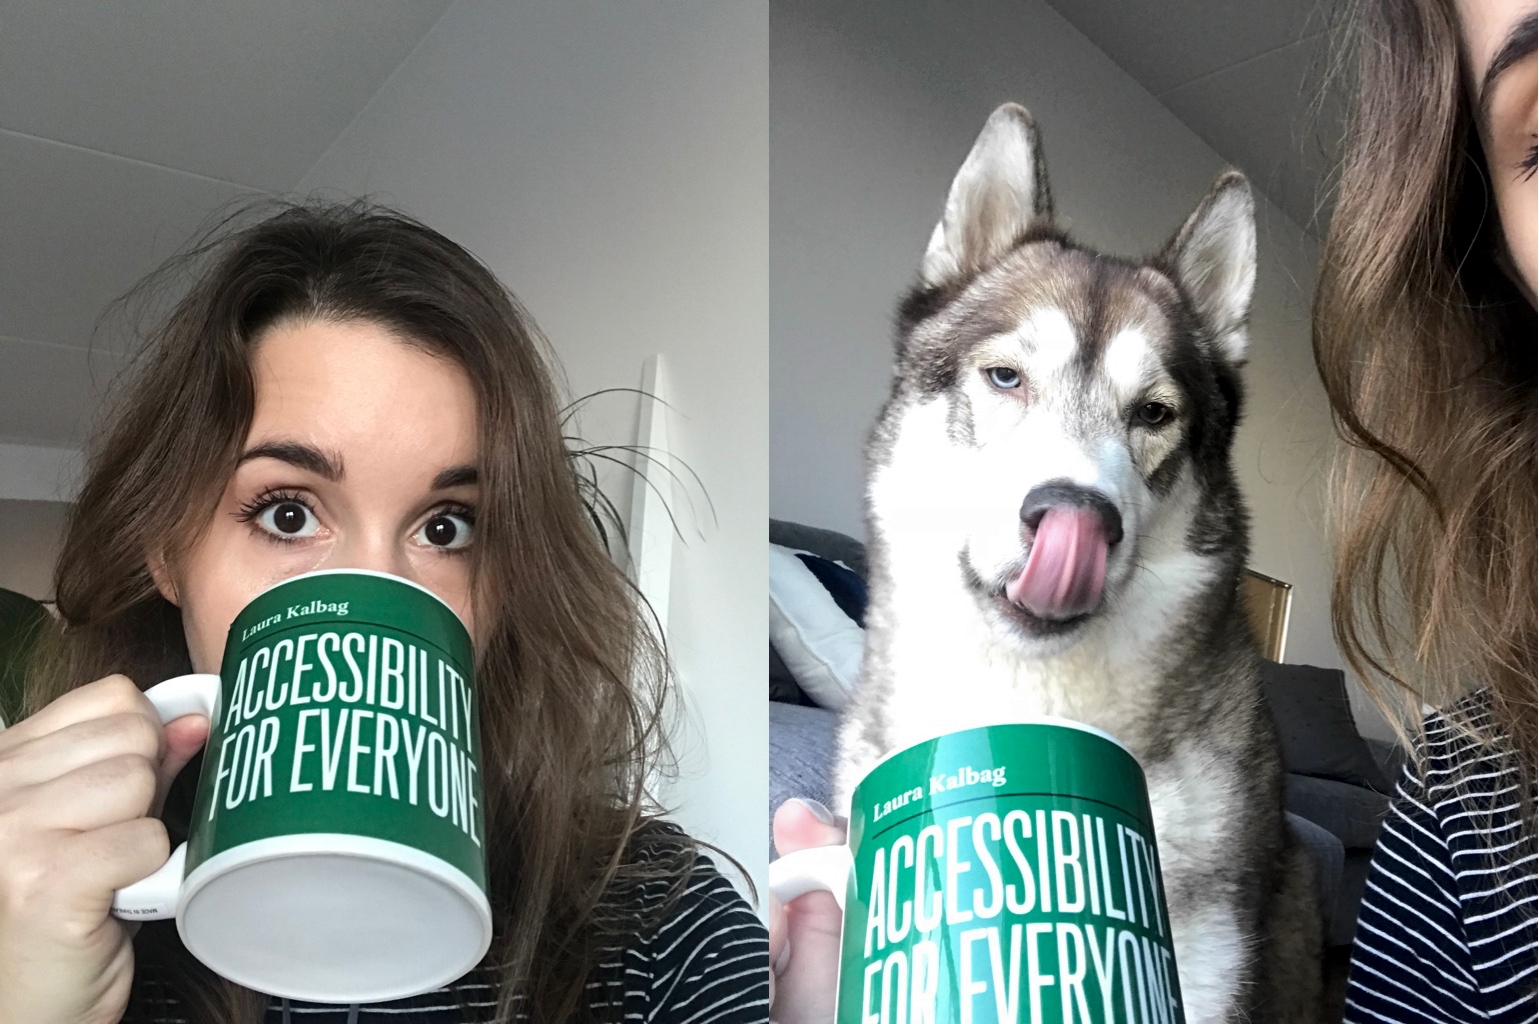 Two photos. One showing Laura drinking from a green mug with the Accessibility For Everyone book cover printed on it. The other showing Oskar the husky-malamute dog looking at the same mug and licking his nose.